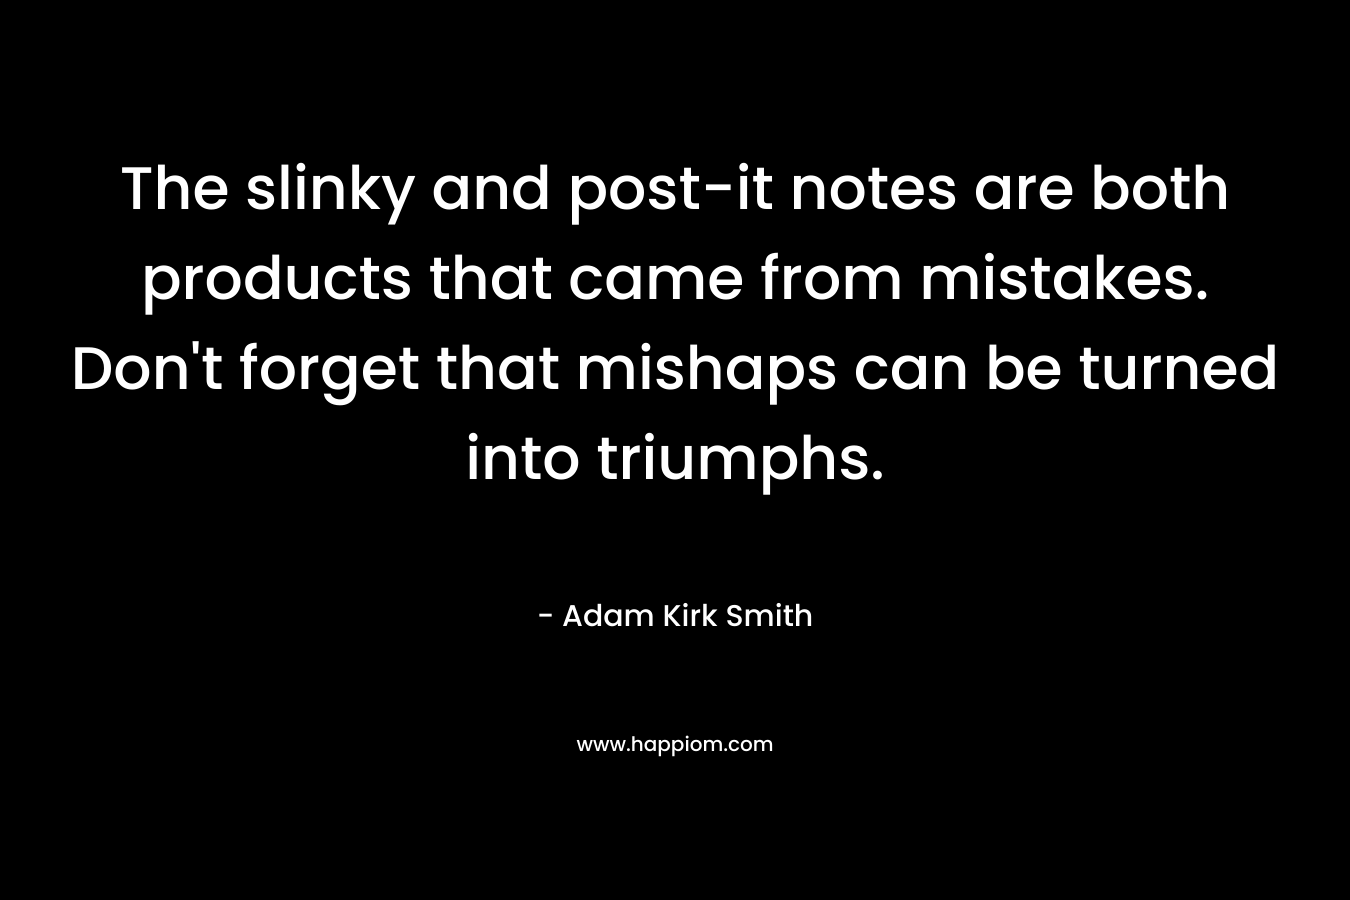 The slinky and post-it notes are both products that came from mistakes. Don’t forget that mishaps can be turned into triumphs. – Adam Kirk Smith